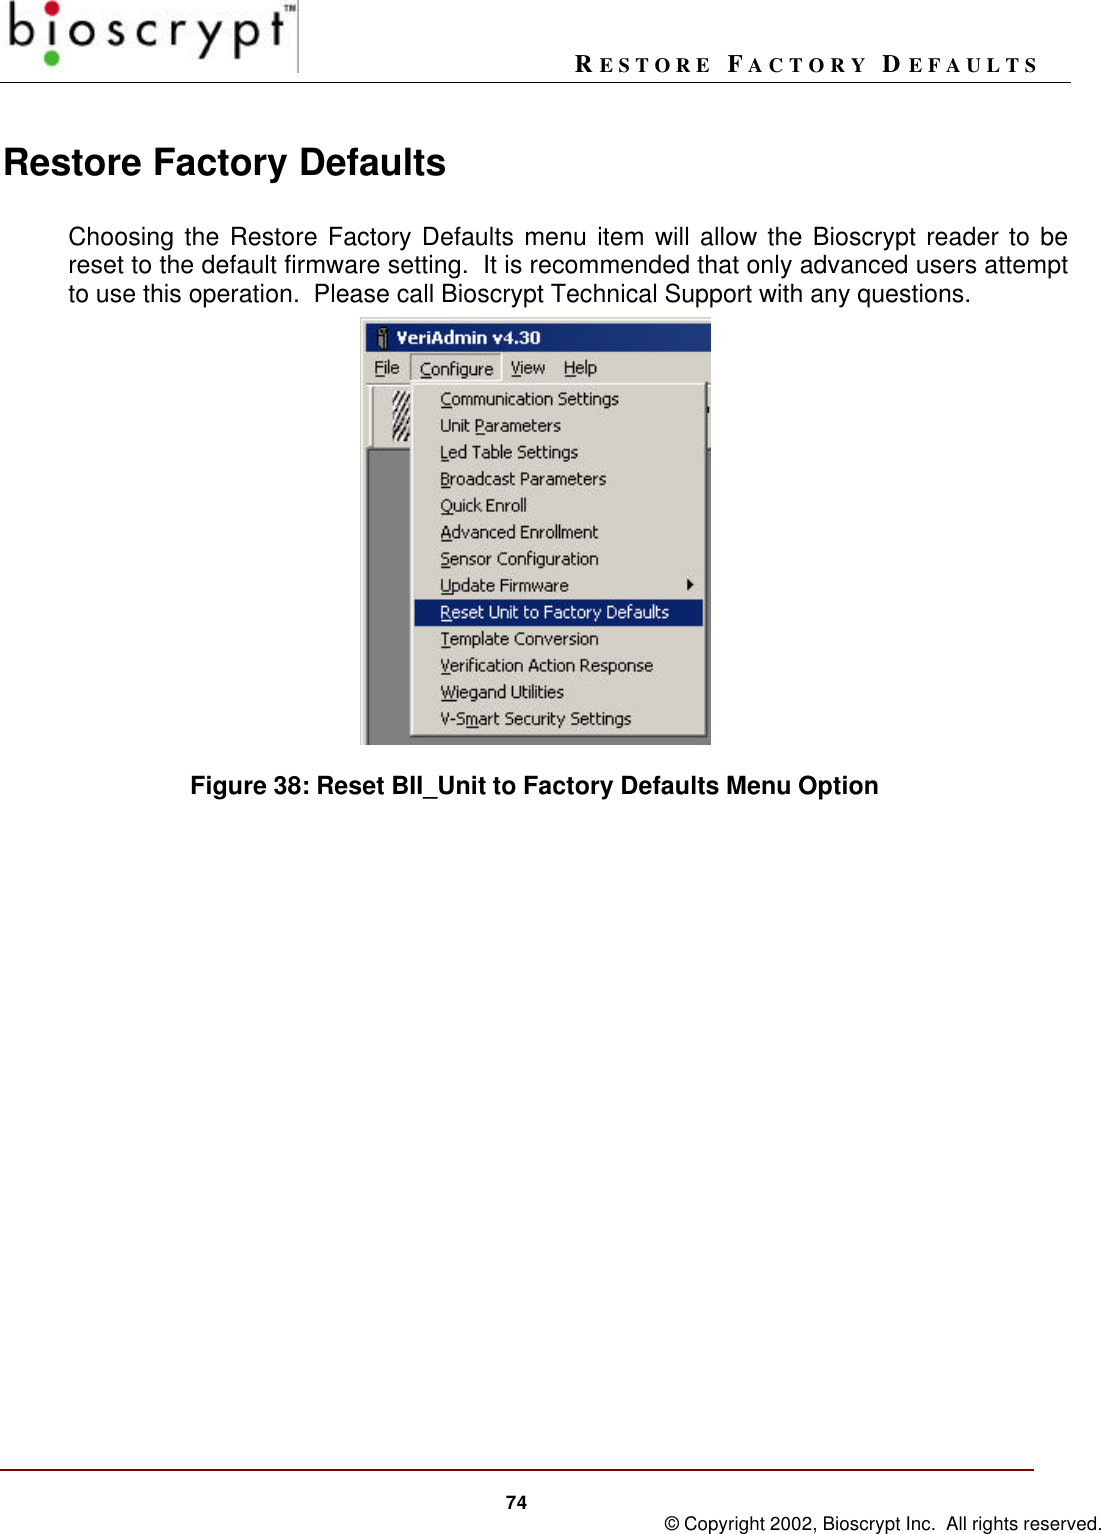 RESTORE FACTORY DEFAULTS74 © Copyright 2002, Bioscrypt Inc.  All rights reserved.Restore Factory DefaultsChoosing the Restore Factory Defaults menu item will allow the Bioscrypt reader to bereset to the default firmware setting.  It is recommended that only advanced users attemptto use this operation.  Please call Bioscrypt Technical Support with any questions.Figure 38: Reset BII_Unit to Factory Defaults Menu Option